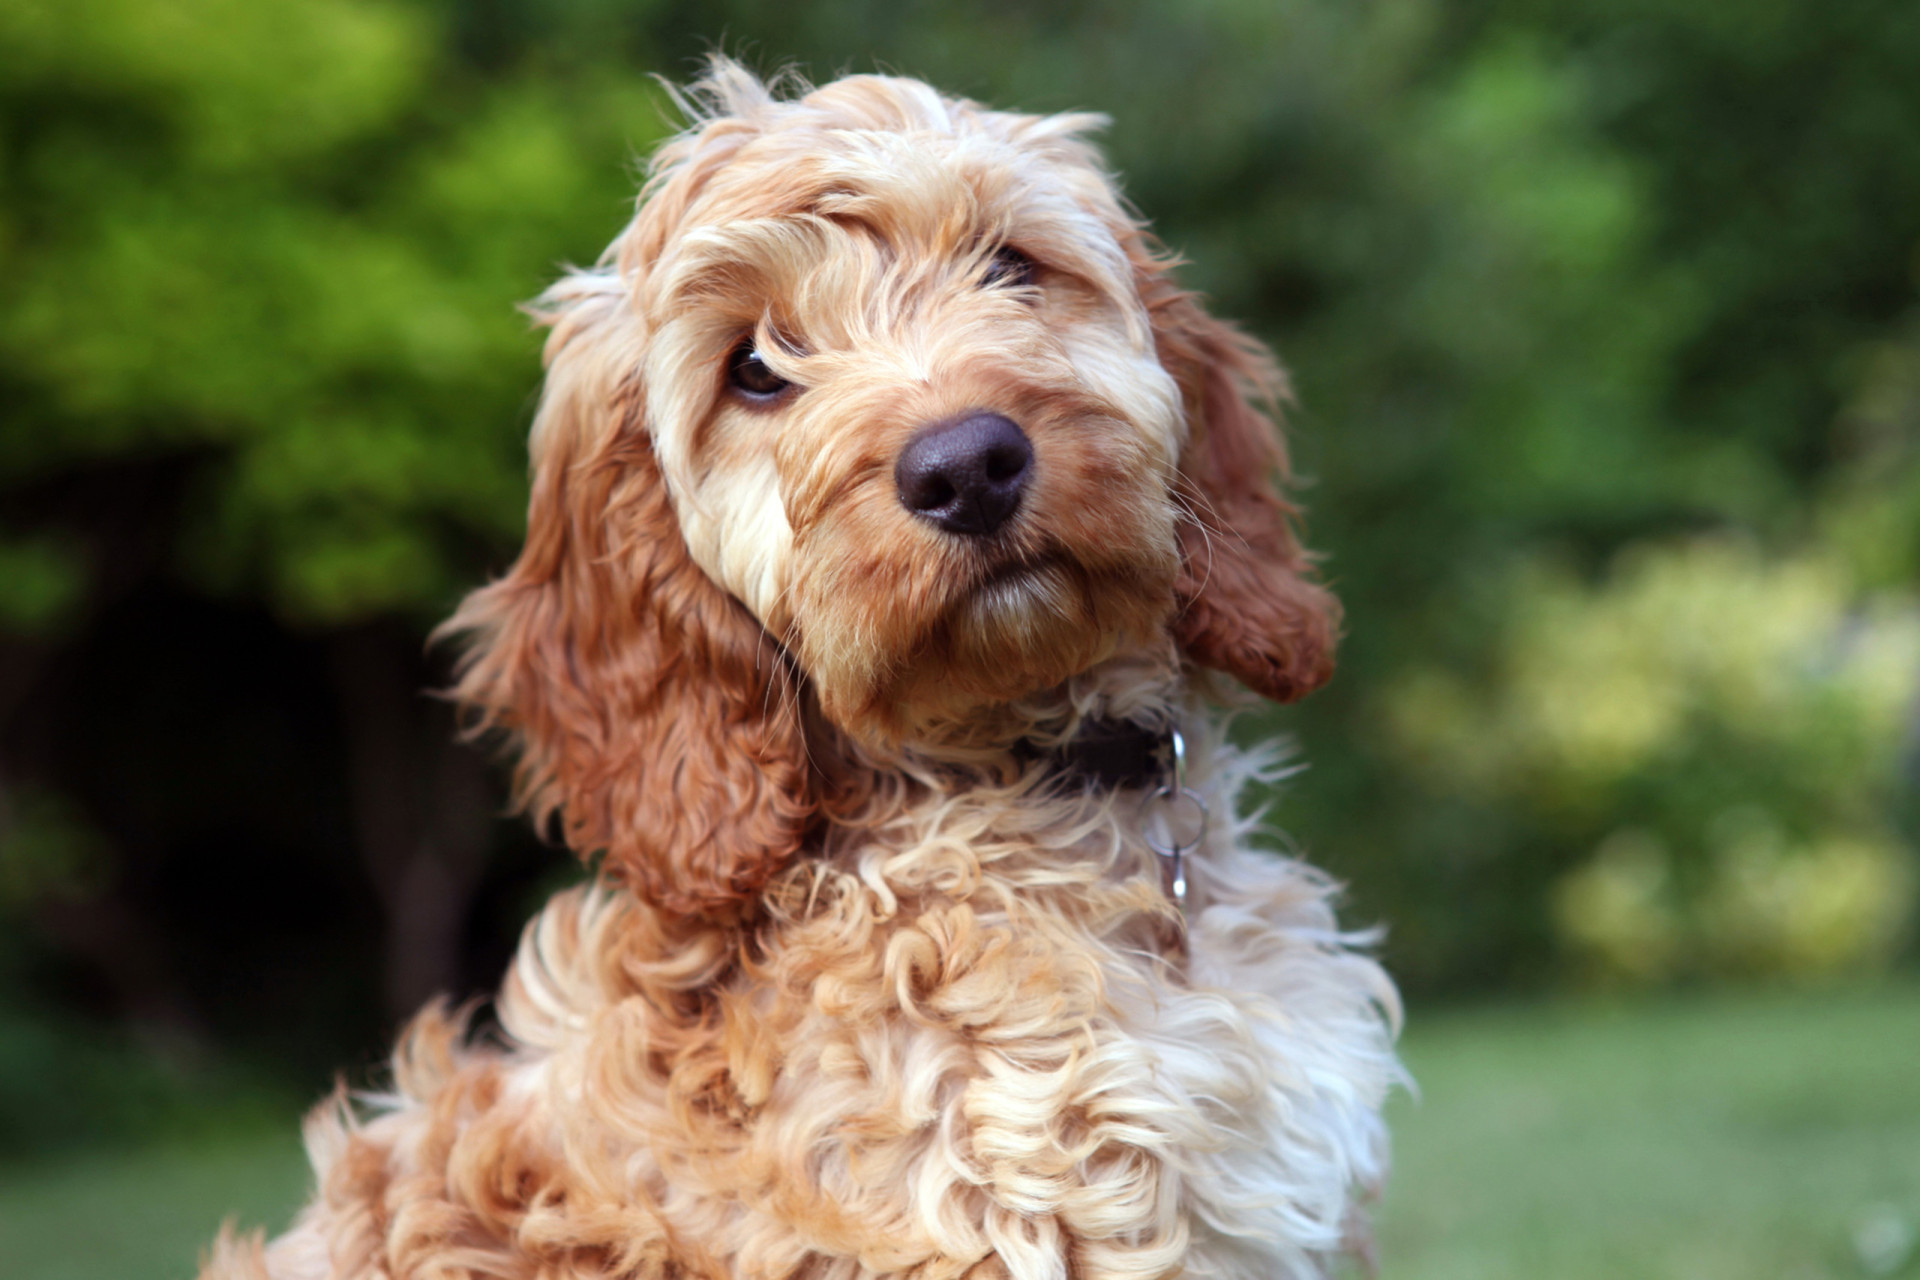 <p>A hybrid of a Cocker Spaniel and a Poodle, Cockapoos are super cute and outgoing. Their average life expectancy is 16 years.</p><p>You may also like:<a href="https://www.starsinsider.com/n/378284?utm_source=msn.com&utm_medium=display&utm_campaign=referral_description&utm_content=605595en-us"> Female celebrities who look shockingly like famous men</a></p>